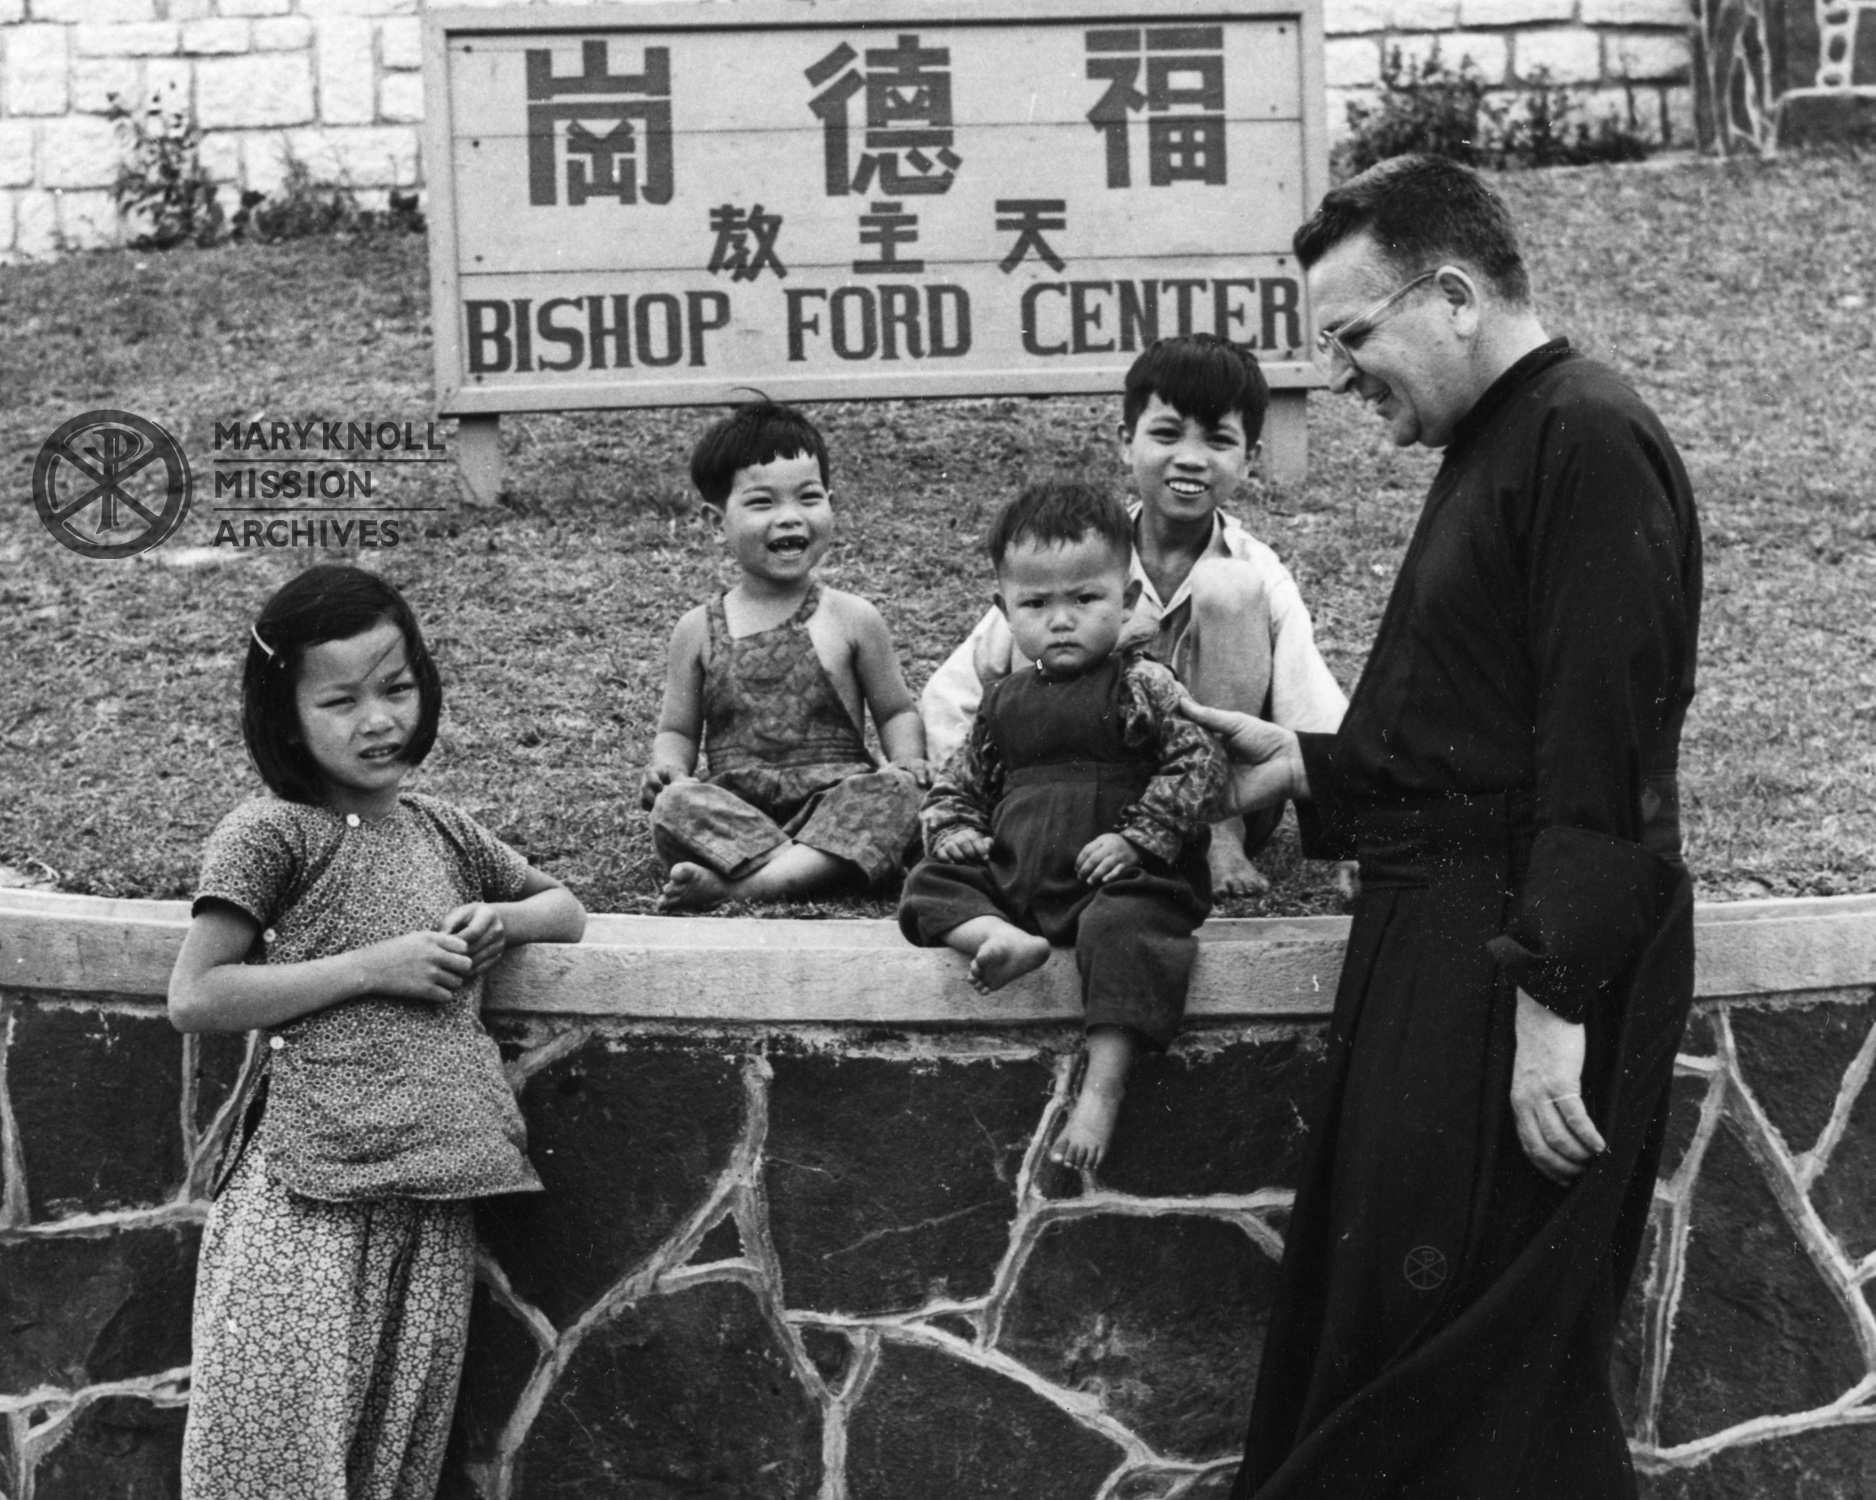 Fr. Trube with Chinese Children in front of the Bishop Ford Center sign, c. 1953